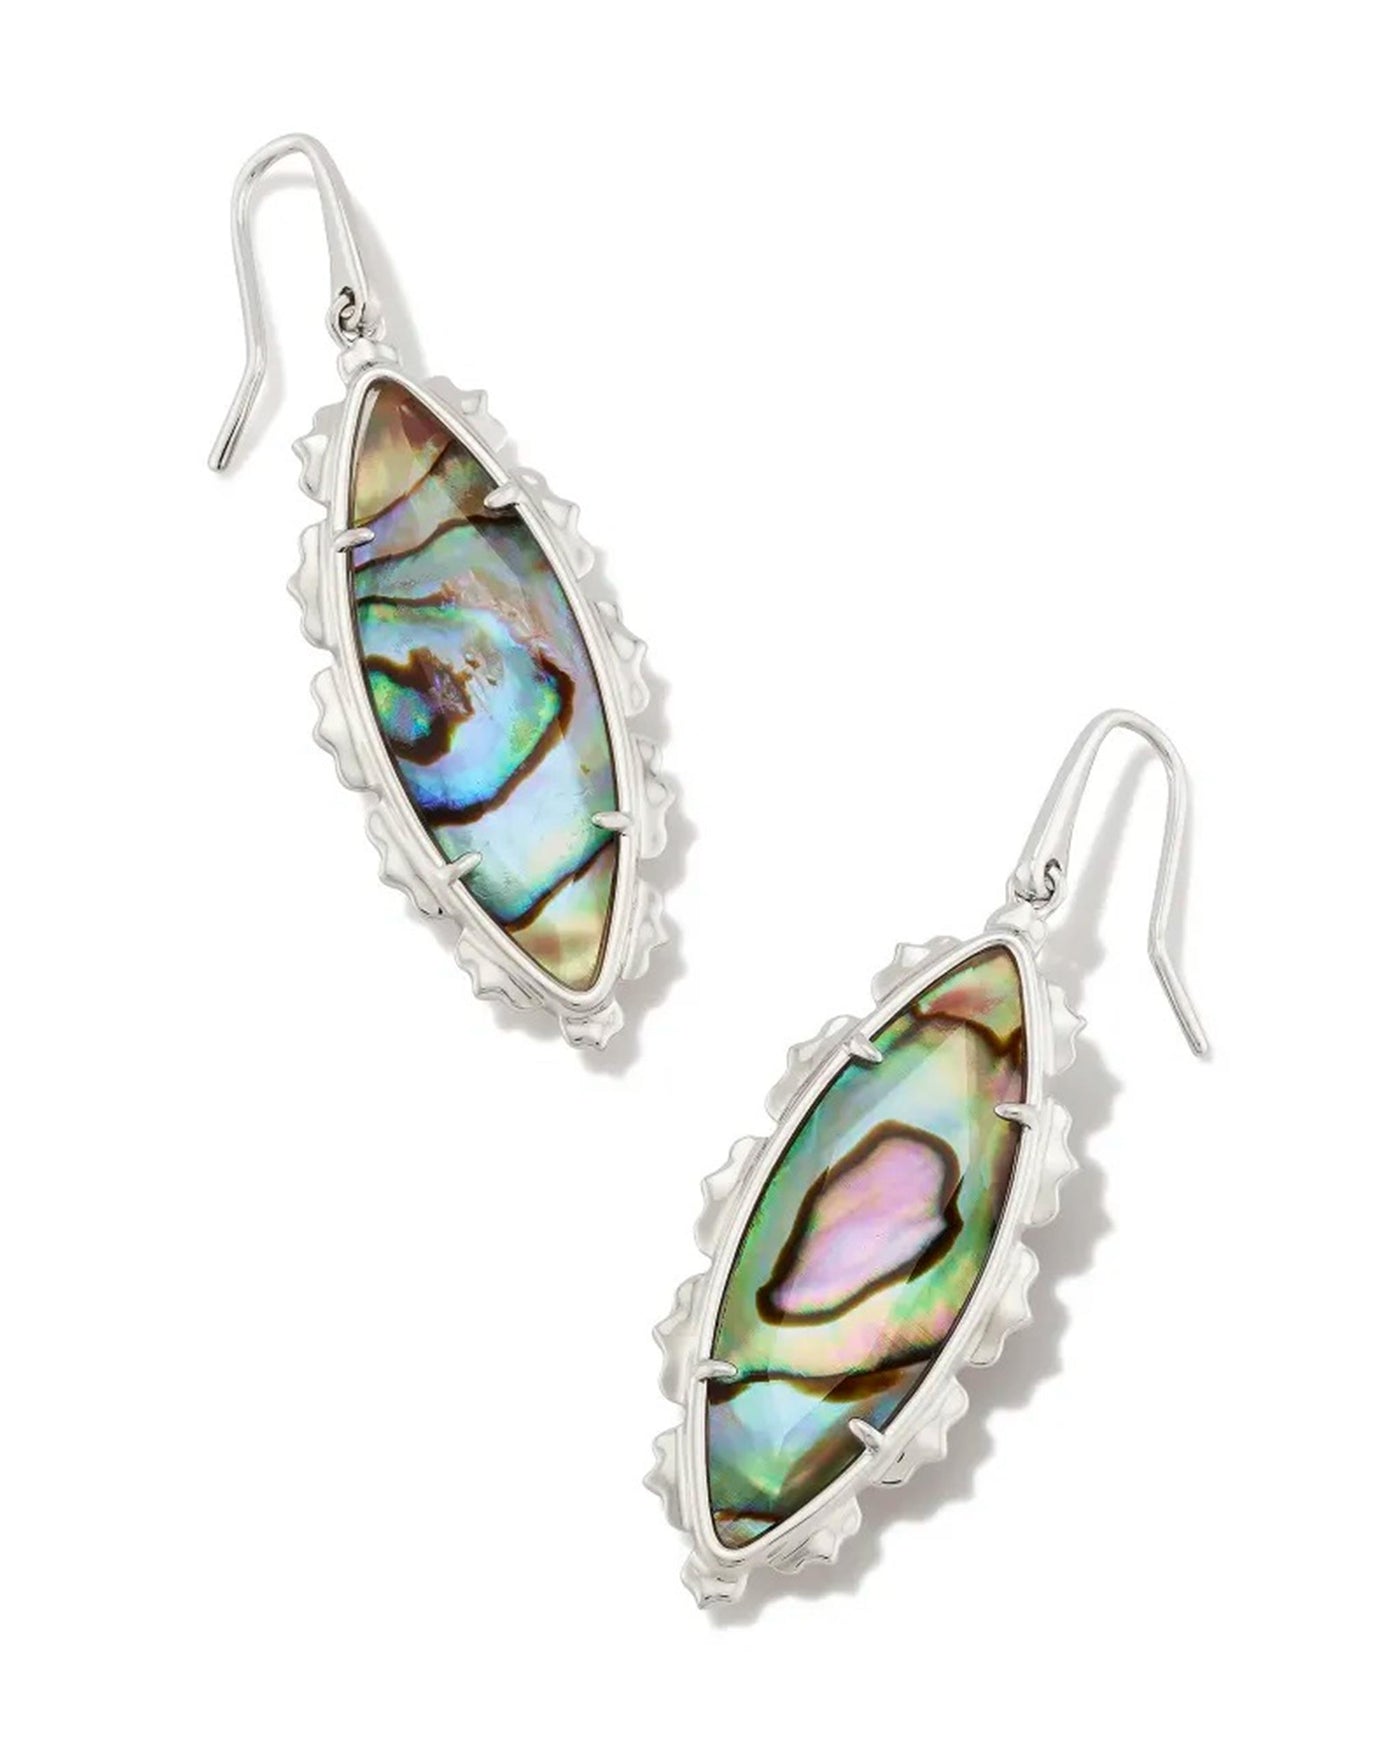 Silver Tone Earrings Featuring Dichroic Abalone by Kendra Scott